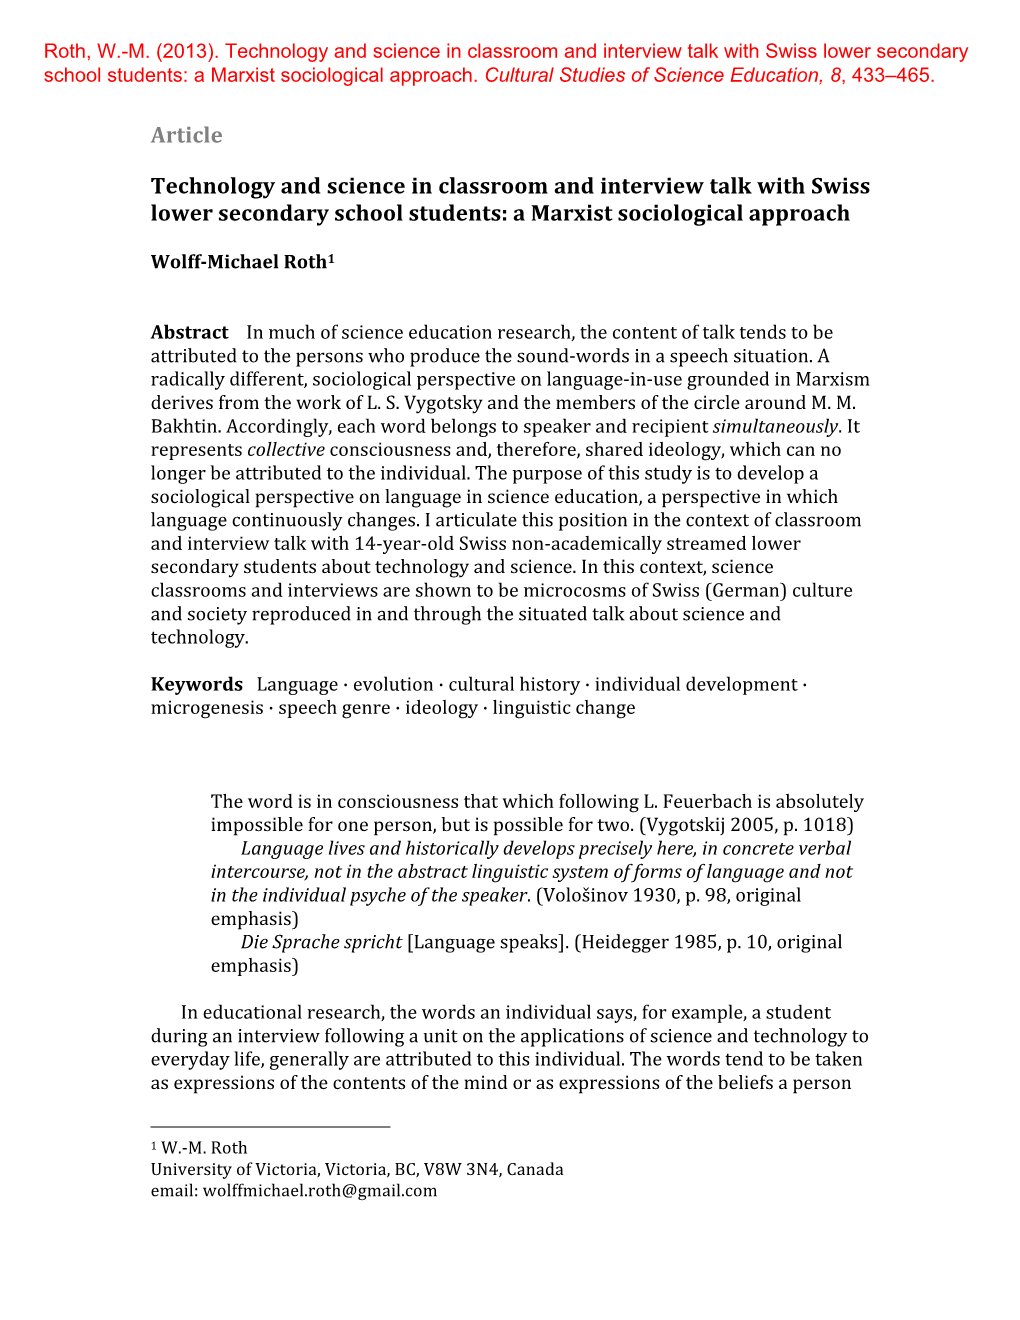 Technology and Science in Classroom and Interview Talk with Swiss Lower Secondary School Students: a Marxist Sociological Approach